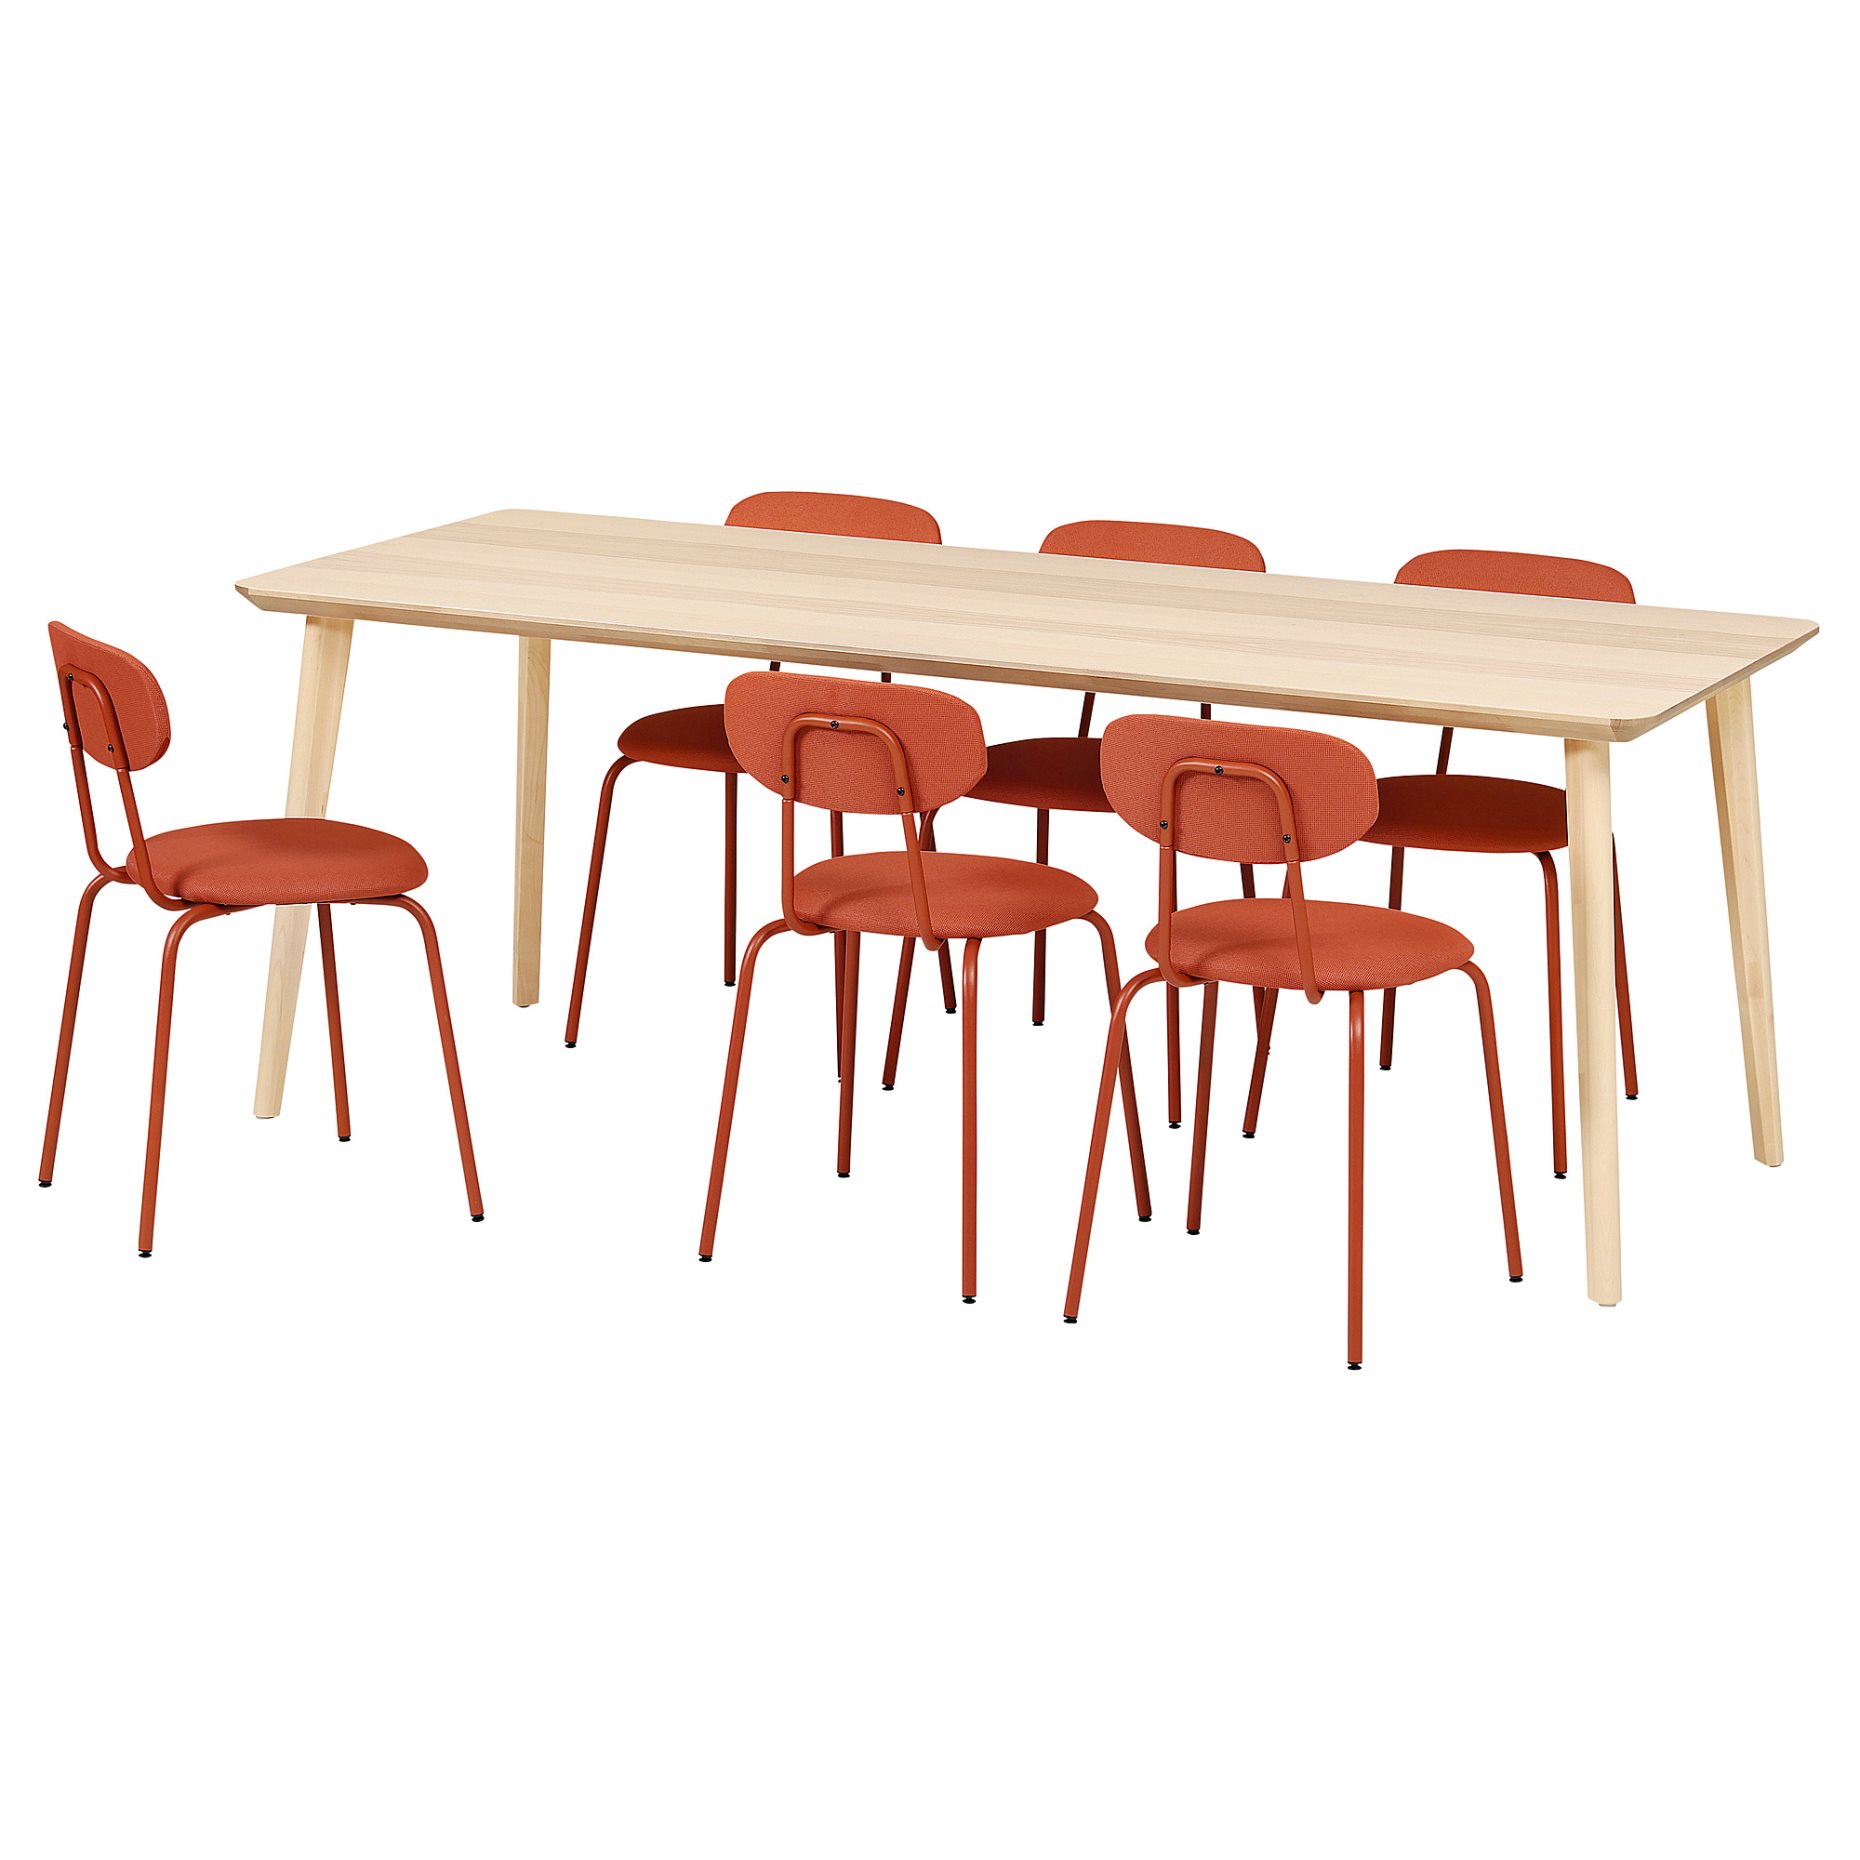 LISABO/OSTANO, table and 6 chairs, 200 cm, 895.450.74